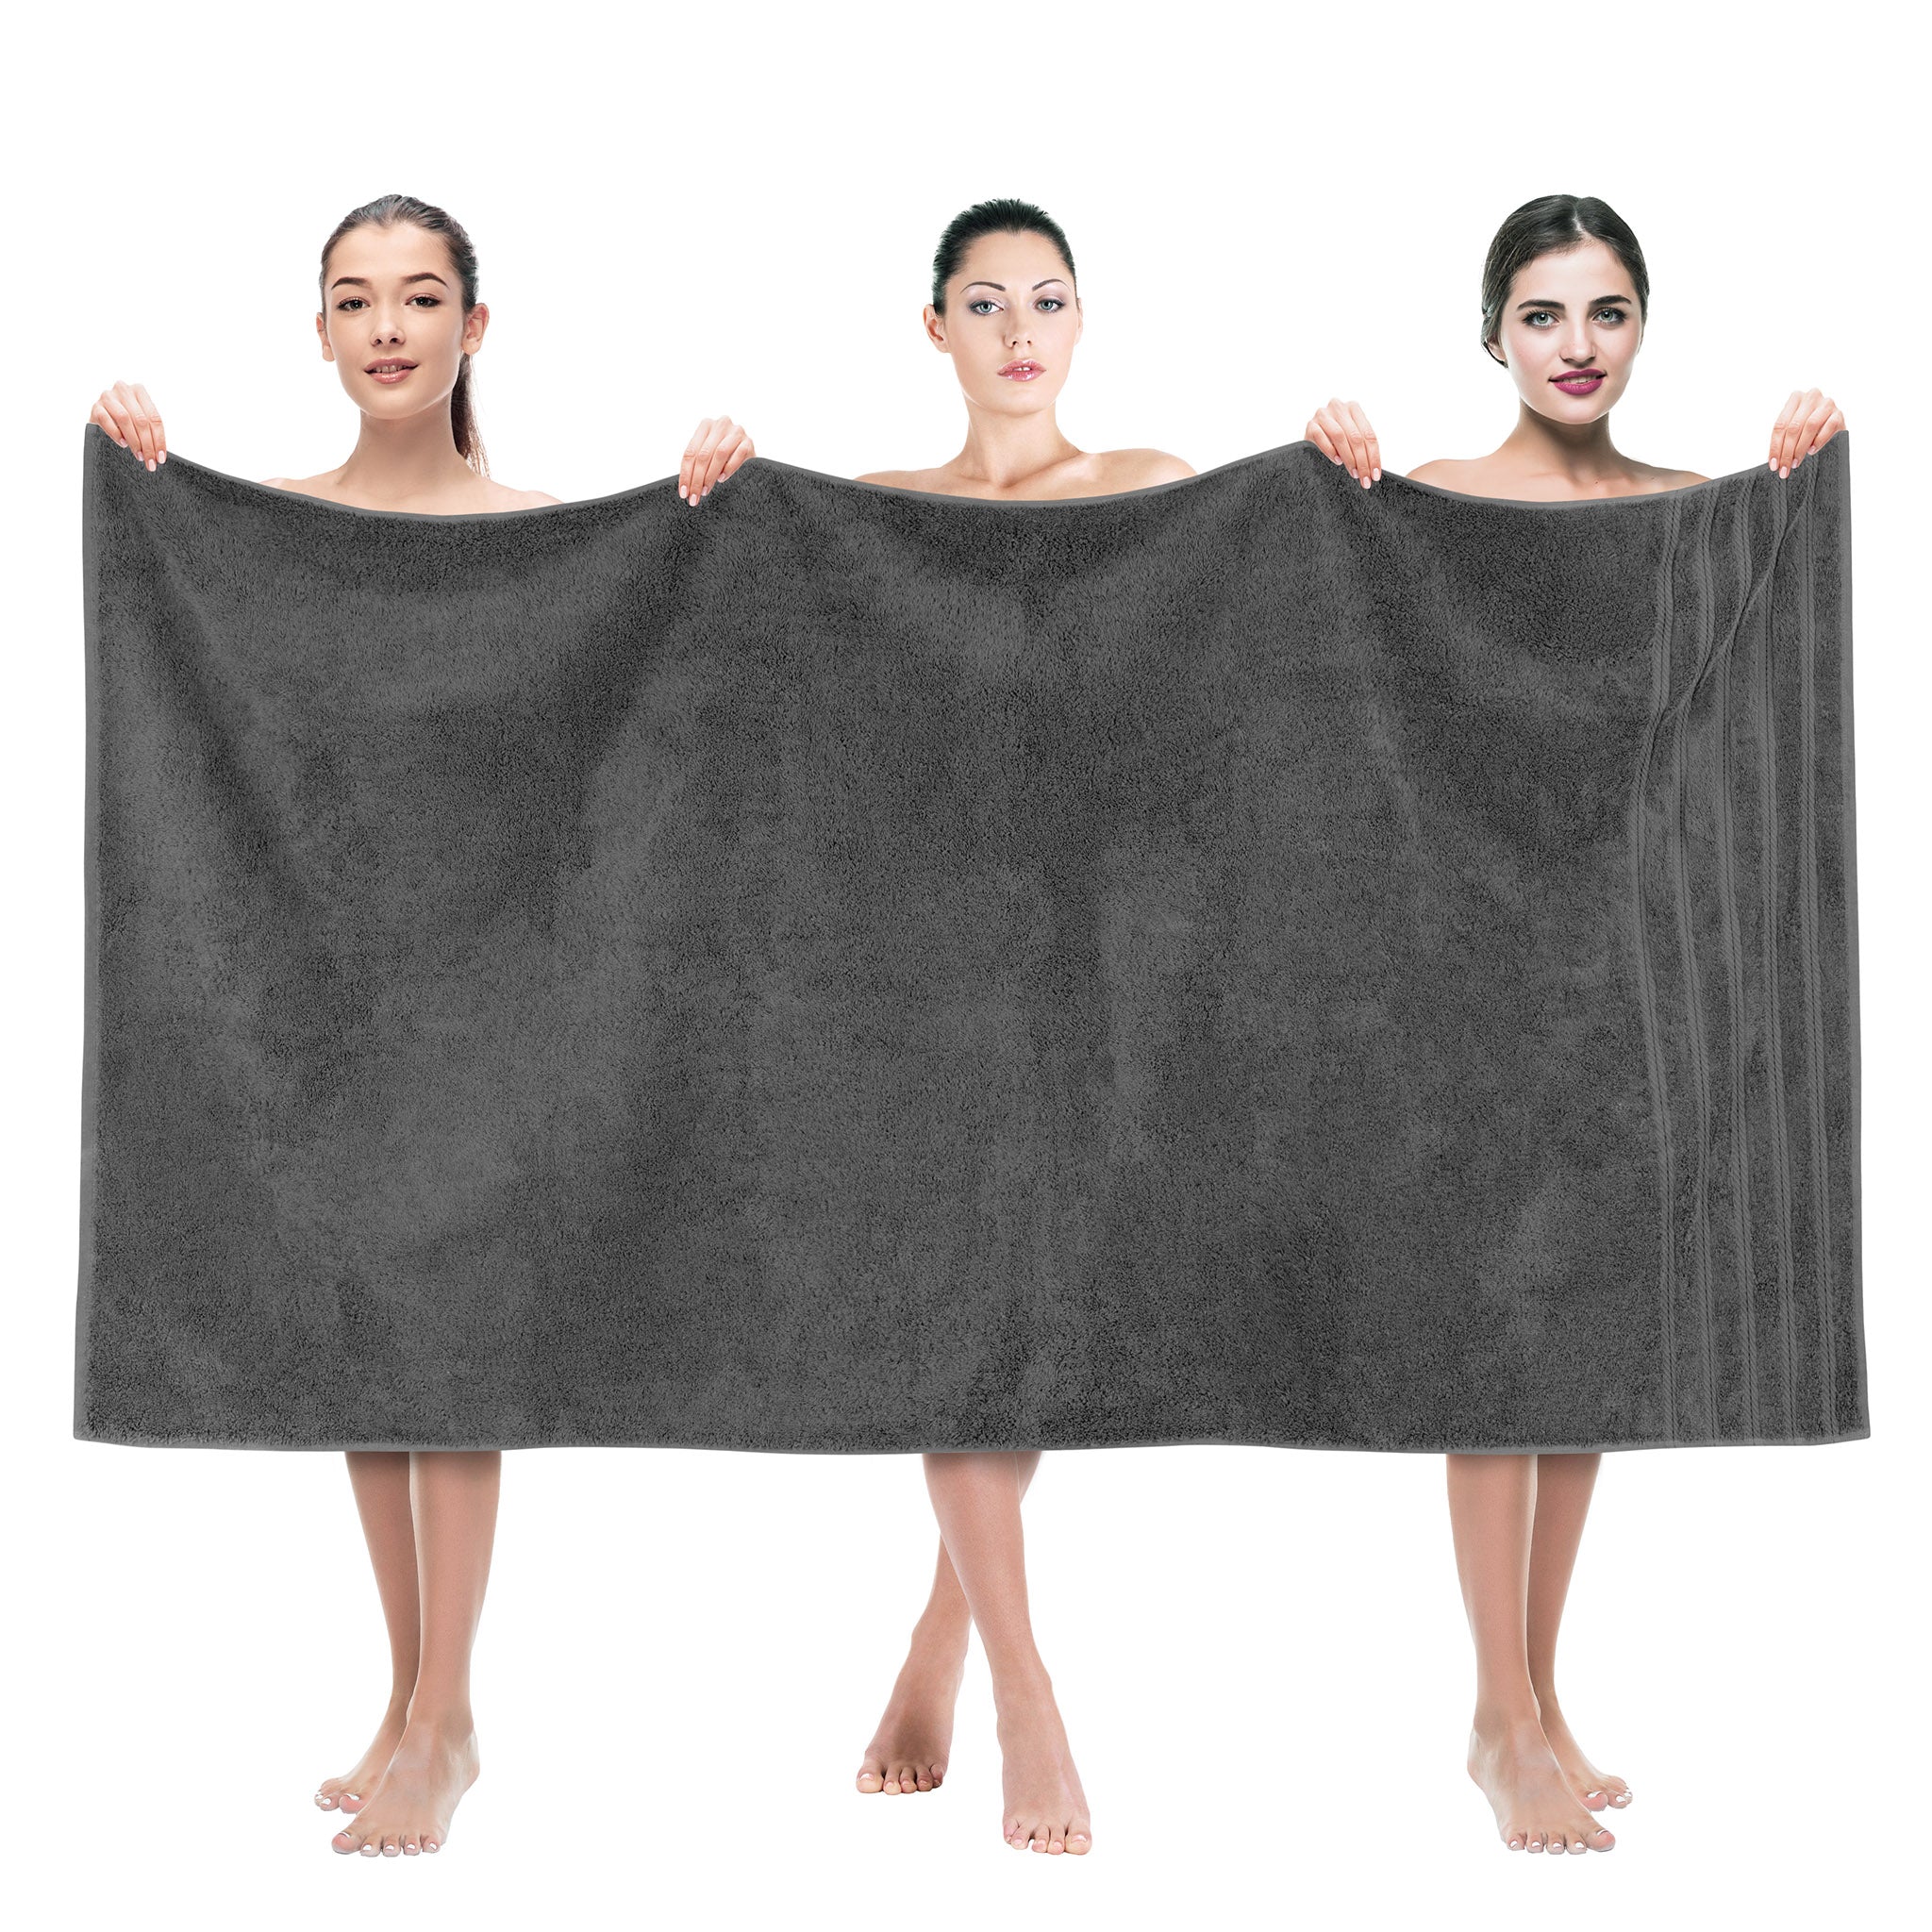 TEXTILOM 100% Turkish Cotton Oversized Luxury Bath Sheets, Jumbo & Extra Large Bath Towels Sheet for Bathroom and Shower with Ma